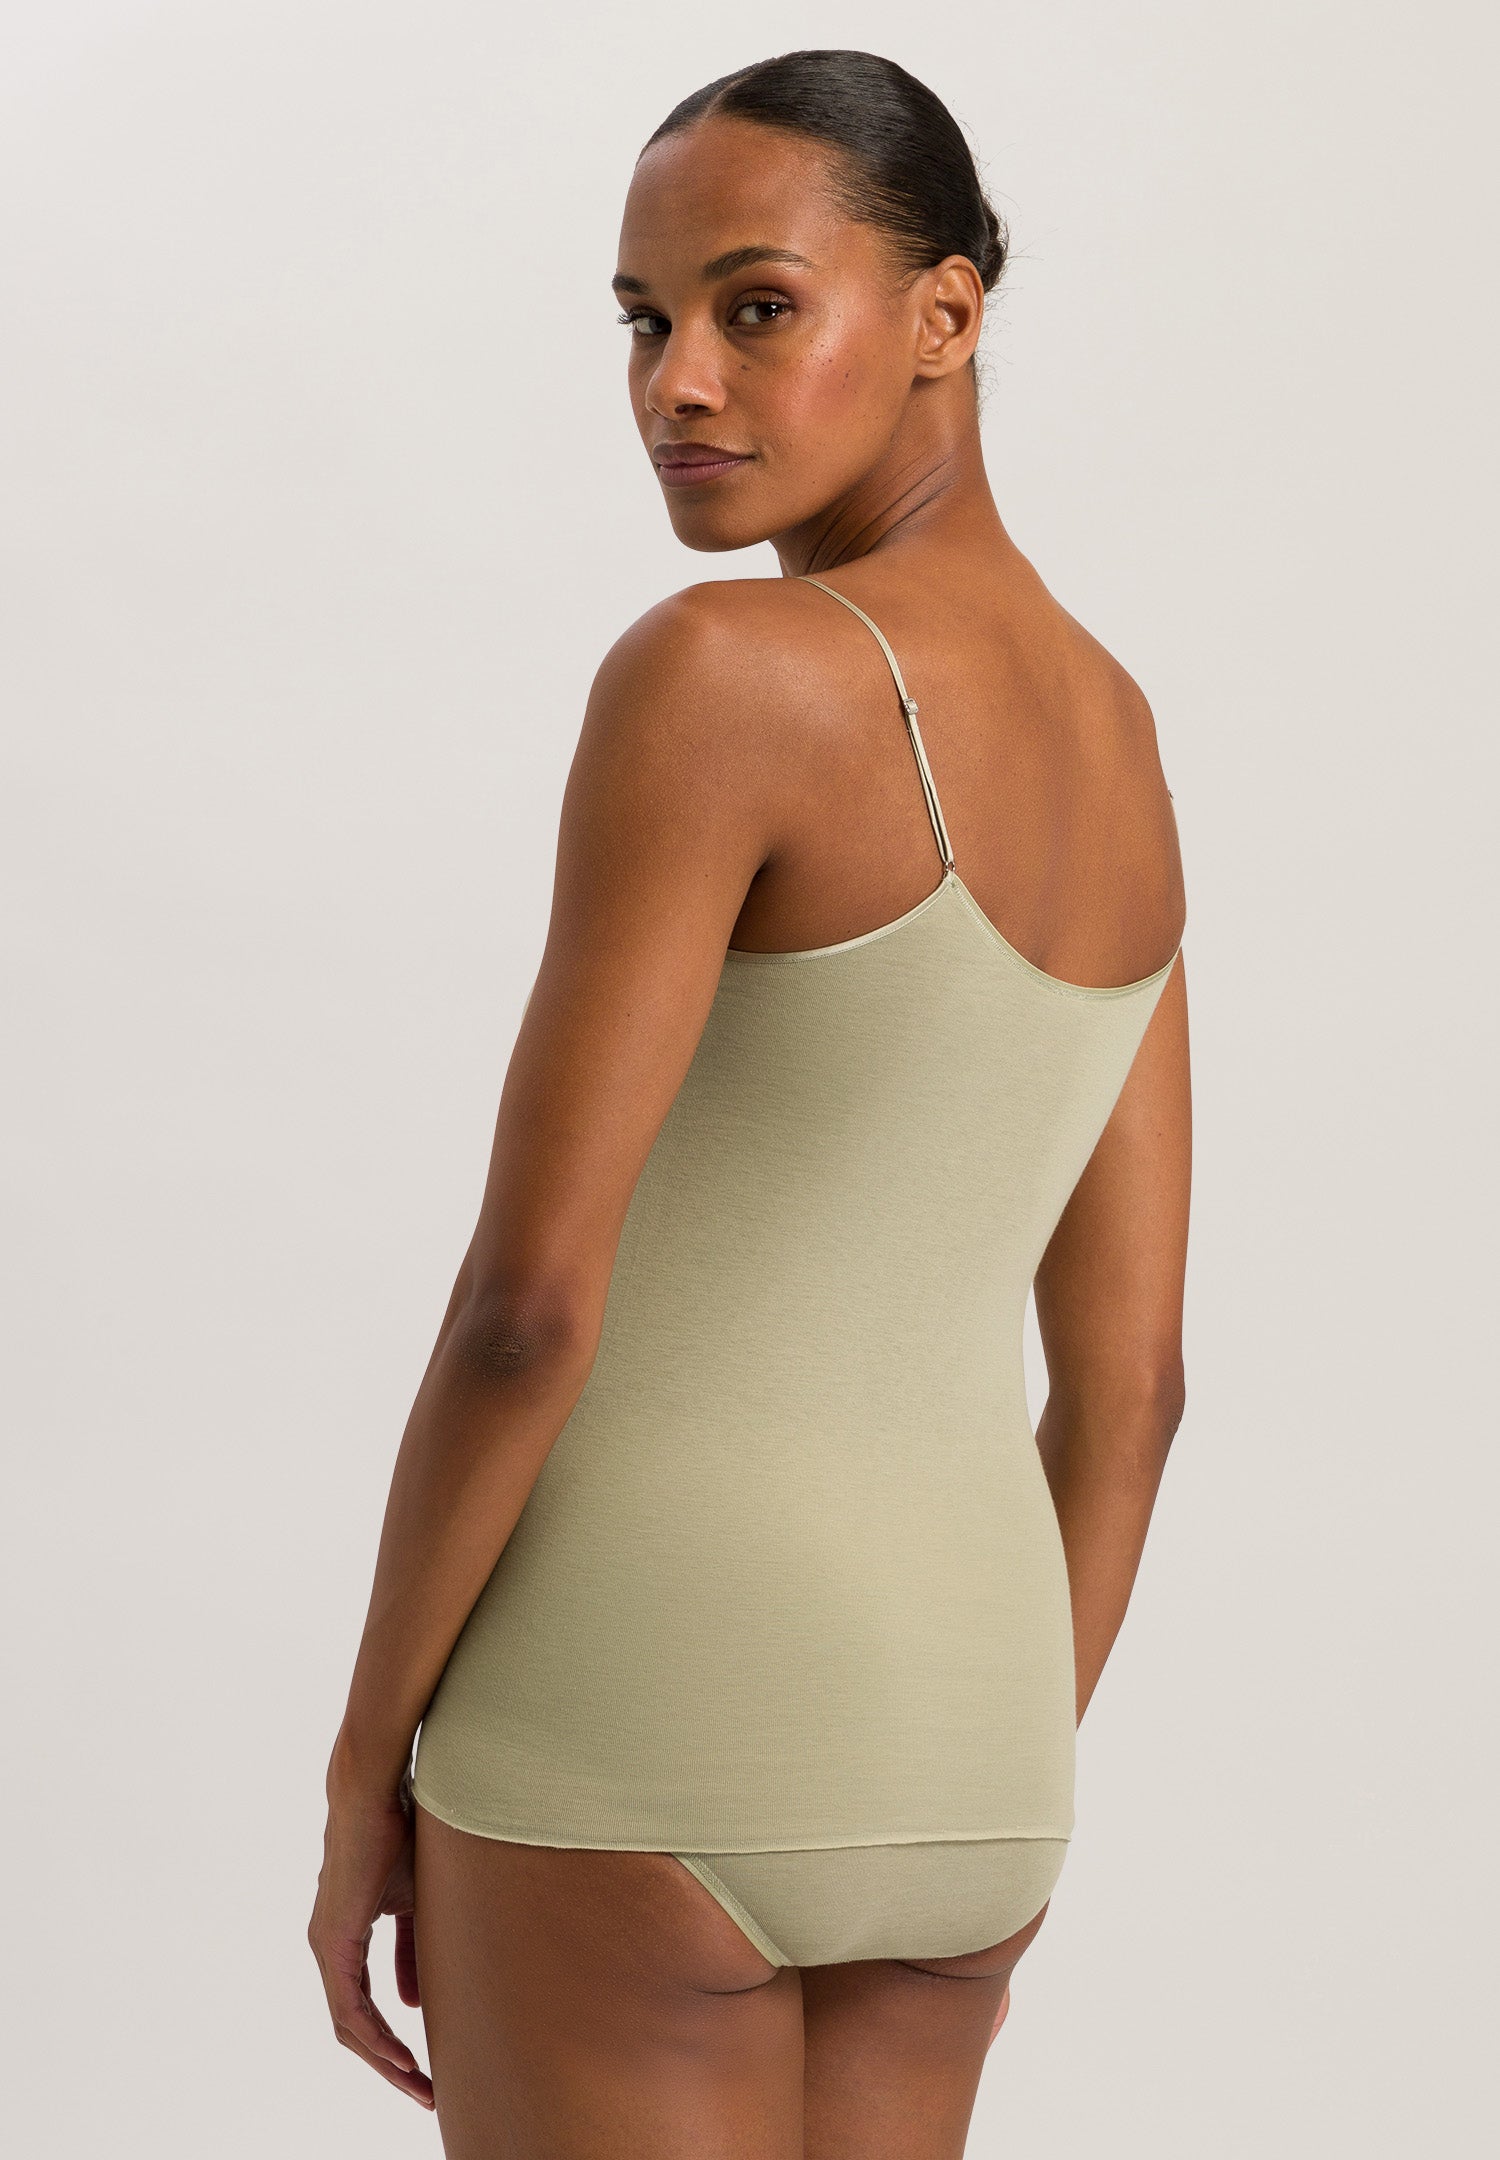 71601 Cotton Seamless V-Neck Camisole - 2720 Moss Green